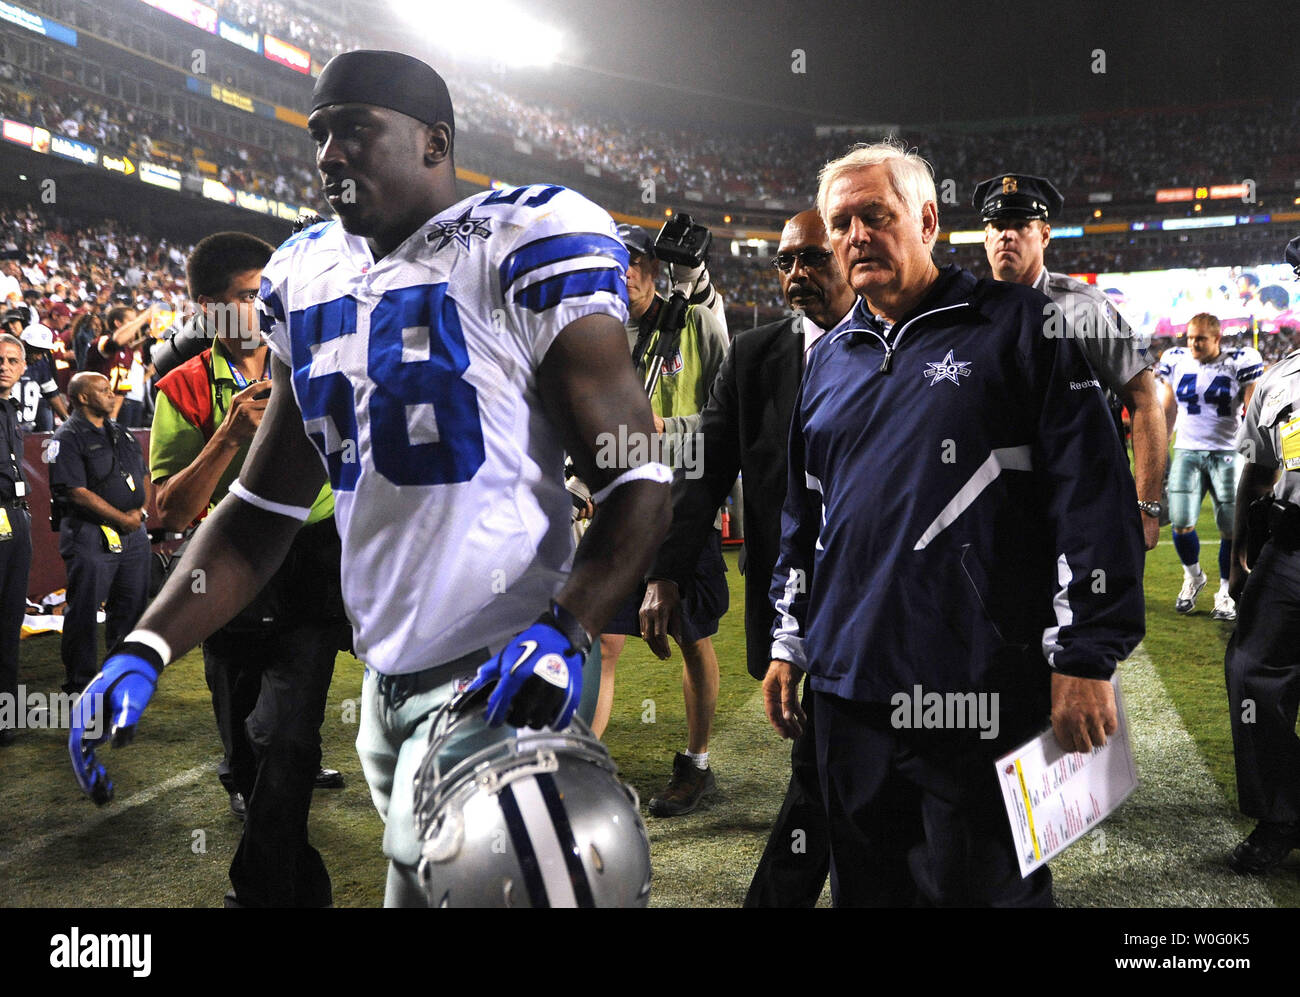 Dallas Cowboys' head coach Wade Phillips and linebacker Jason Williams leave the field after the Cowboys were defeated by Washington Redskins 13-7 at FedEx Field in Landover, Maryland on September 12, 2010.  UPI/Kevin Dietsch Stock Photo